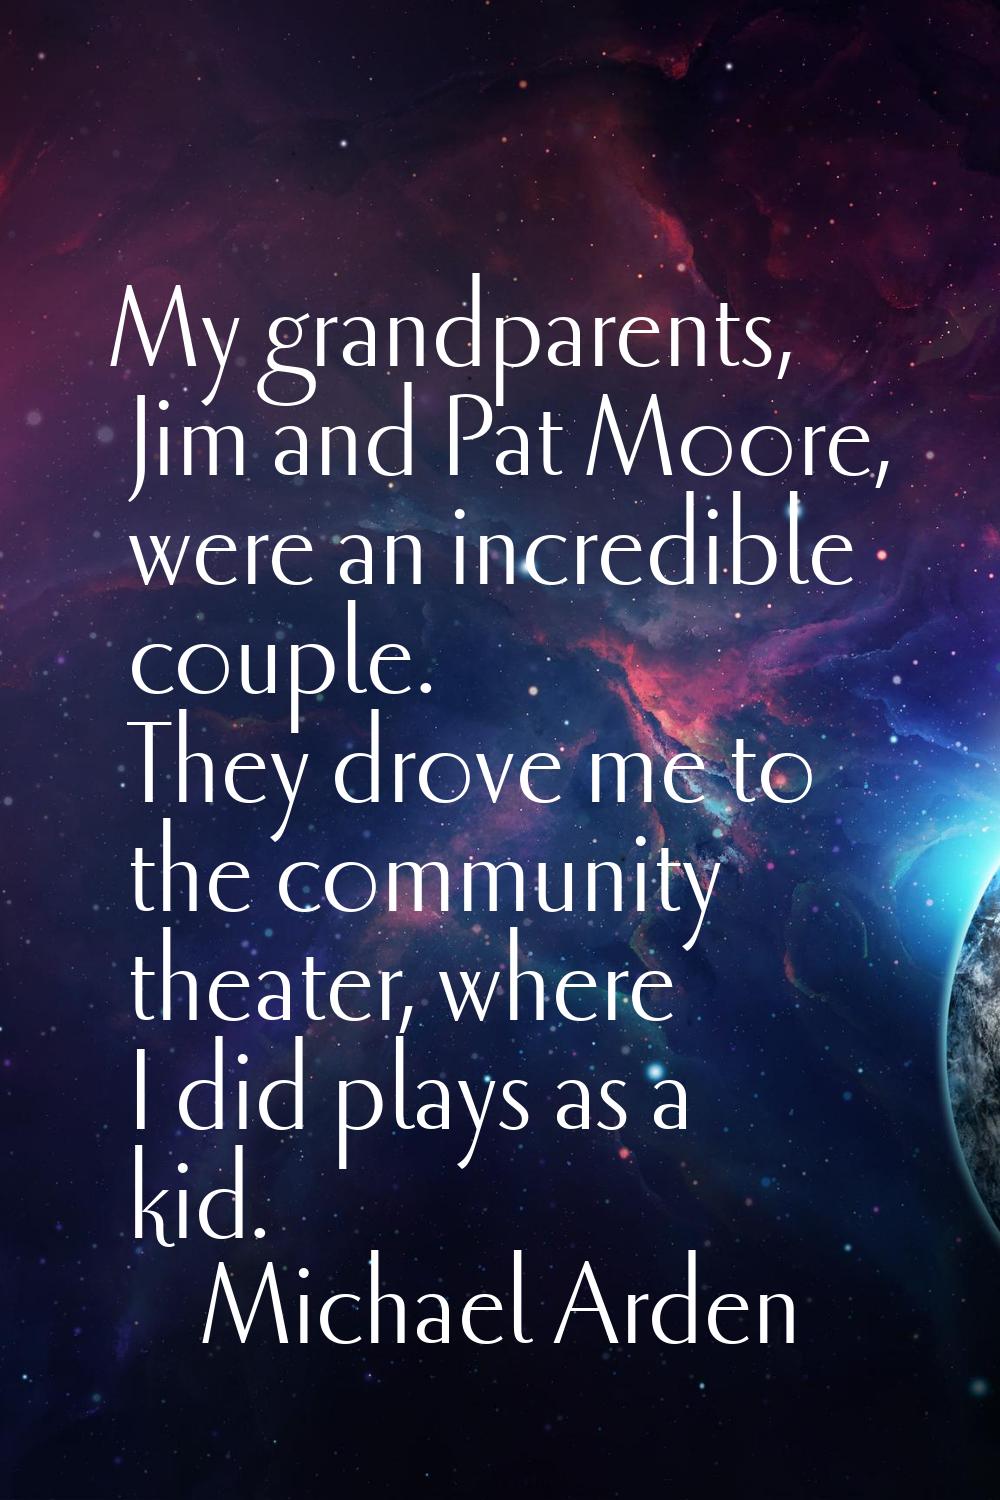 My grandparents, Jim and Pat Moore, were an incredible couple. They drove me to the community theat